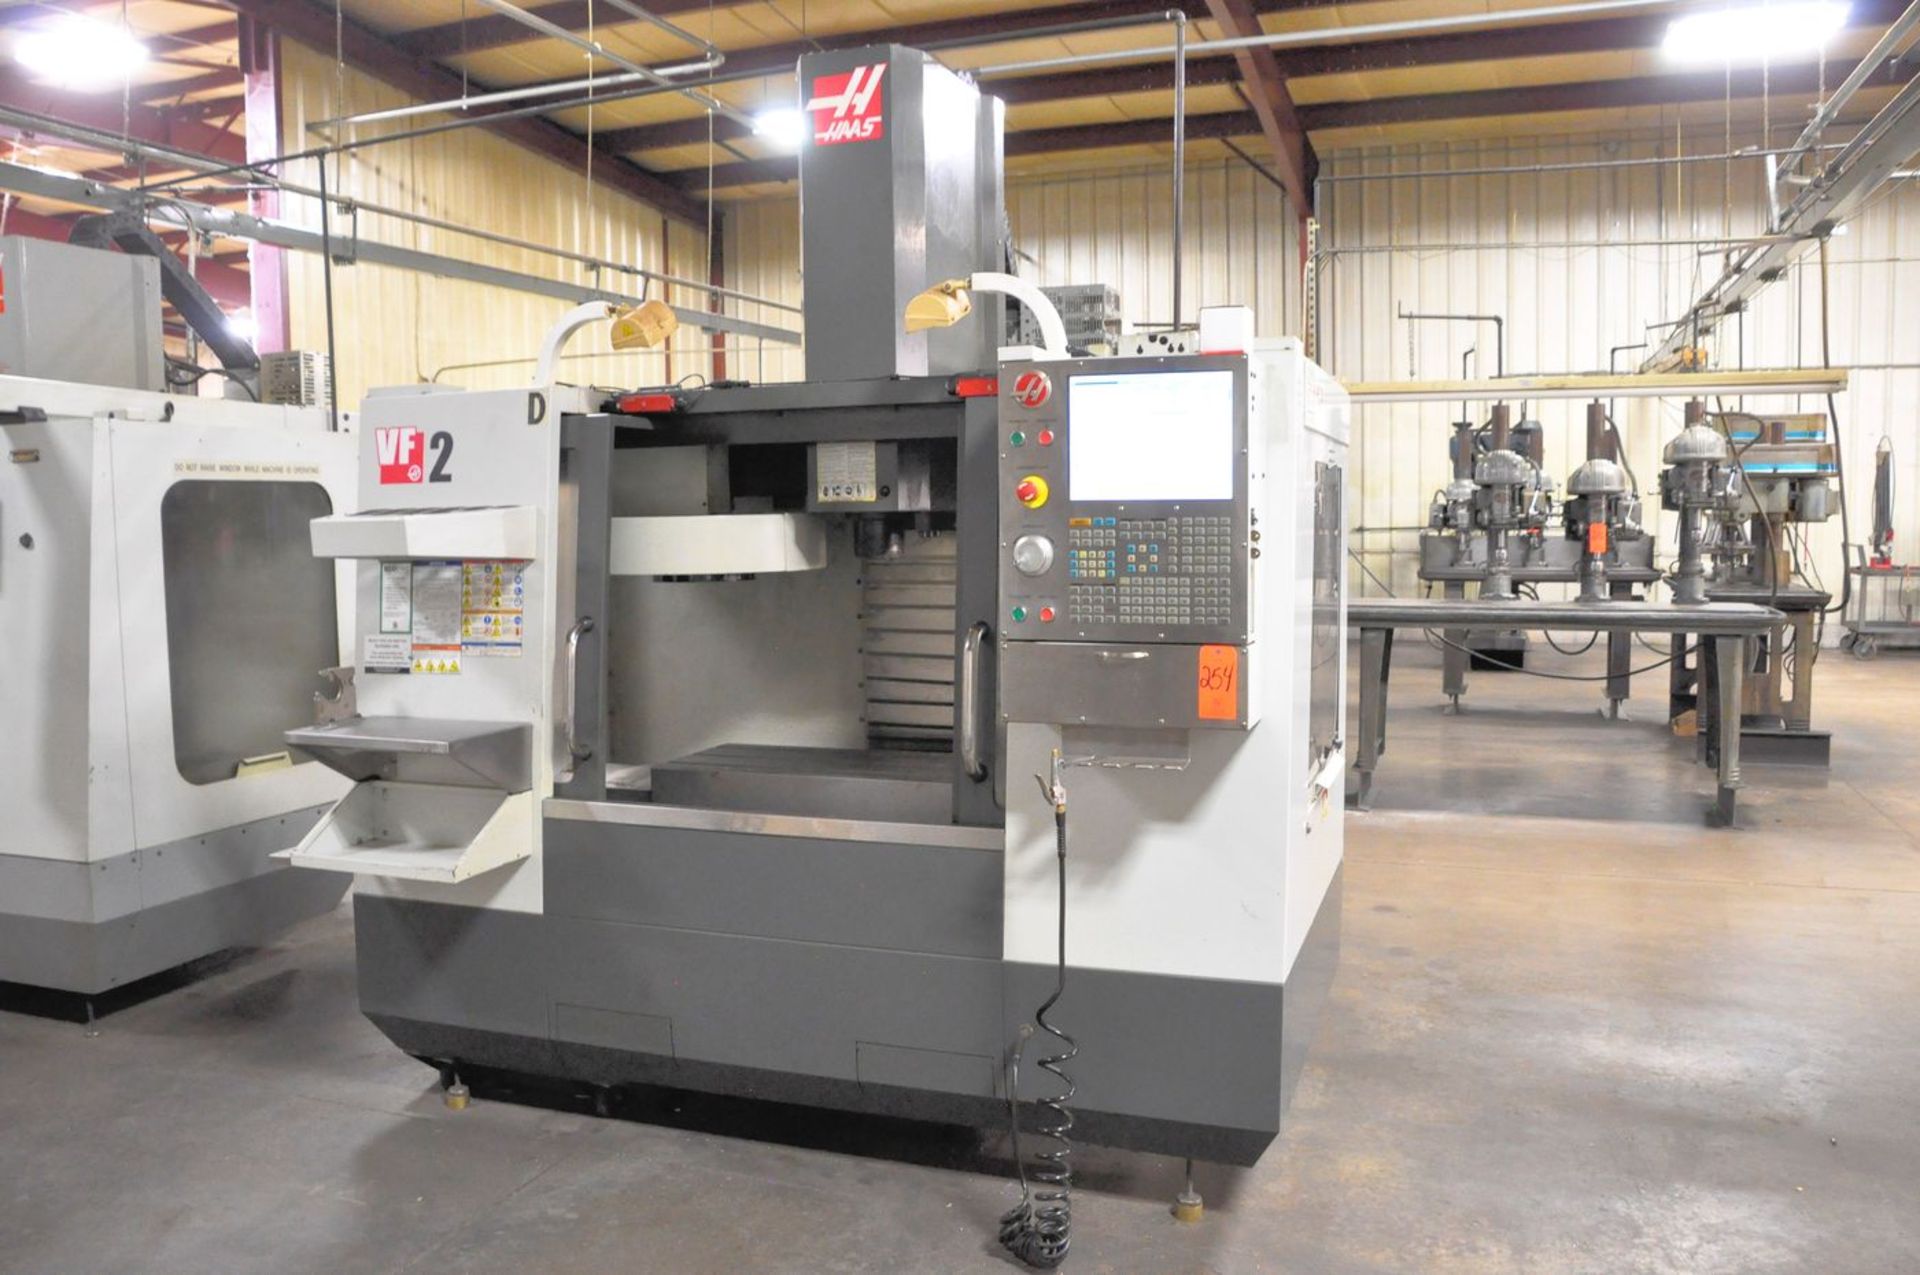 Haas Model VF-2 CNC Vertical Machining Center, S/N: 1089147 (2011); with 20-Position Automatic